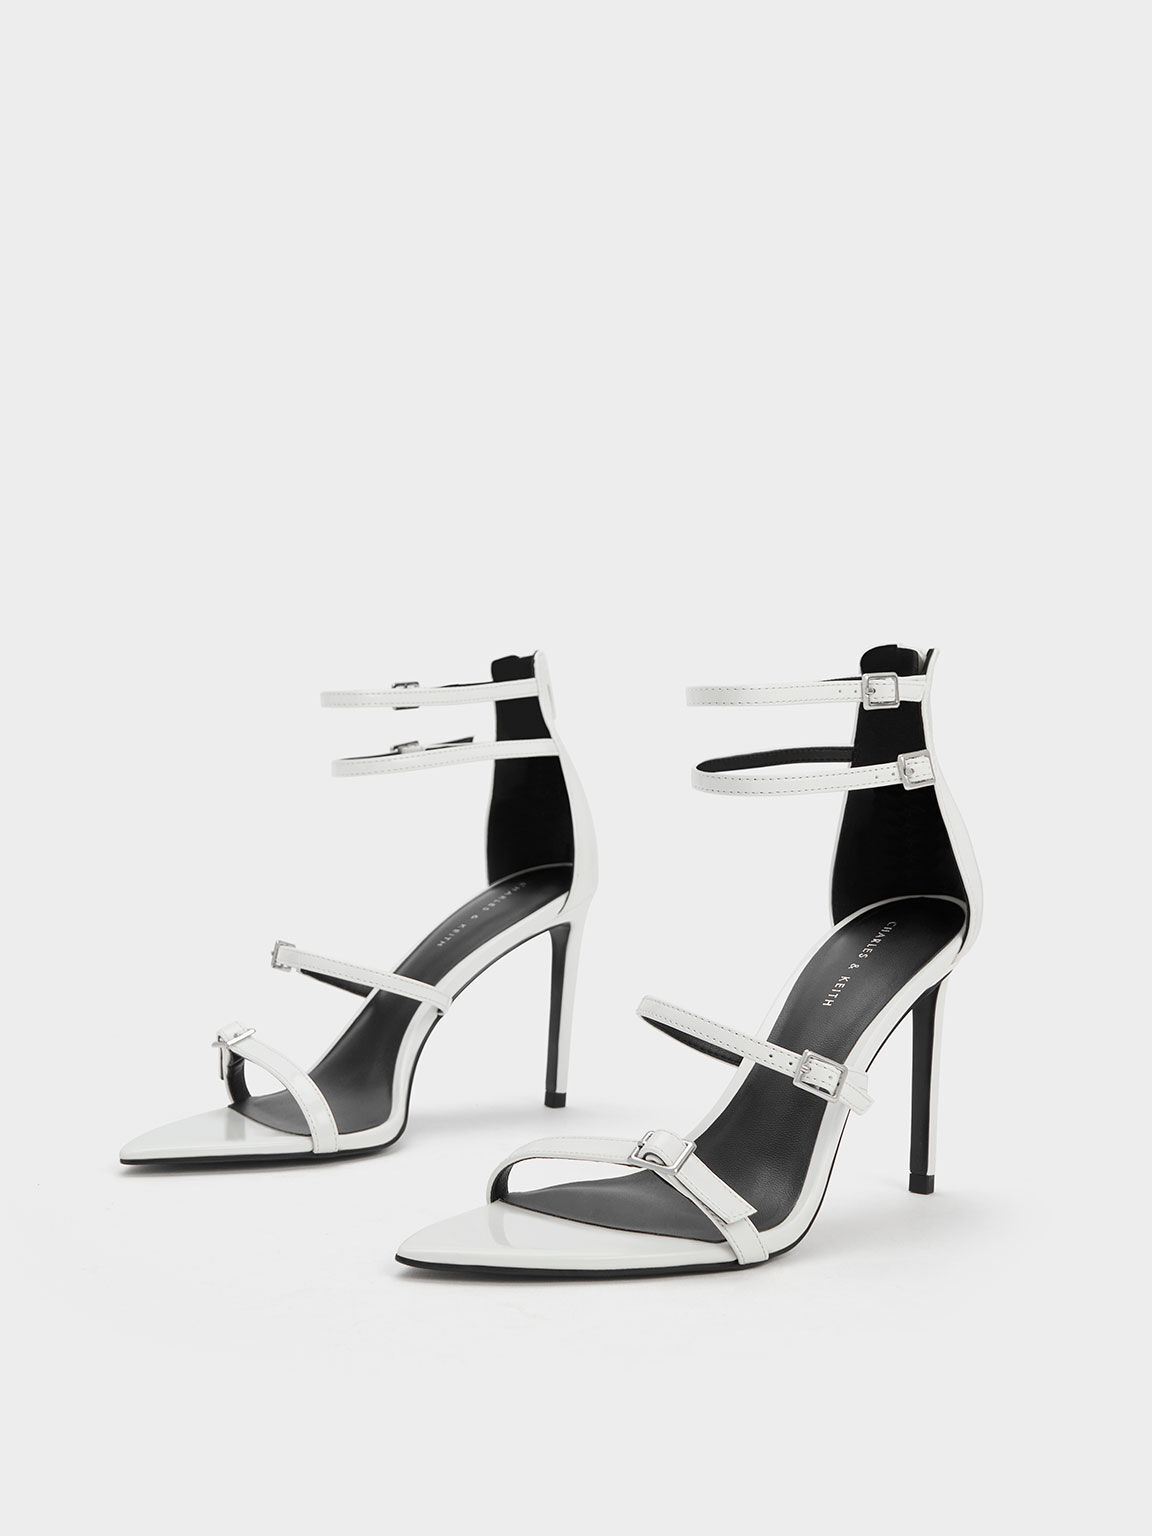 Patent Strappy Heeled Sandals, White, hi-res